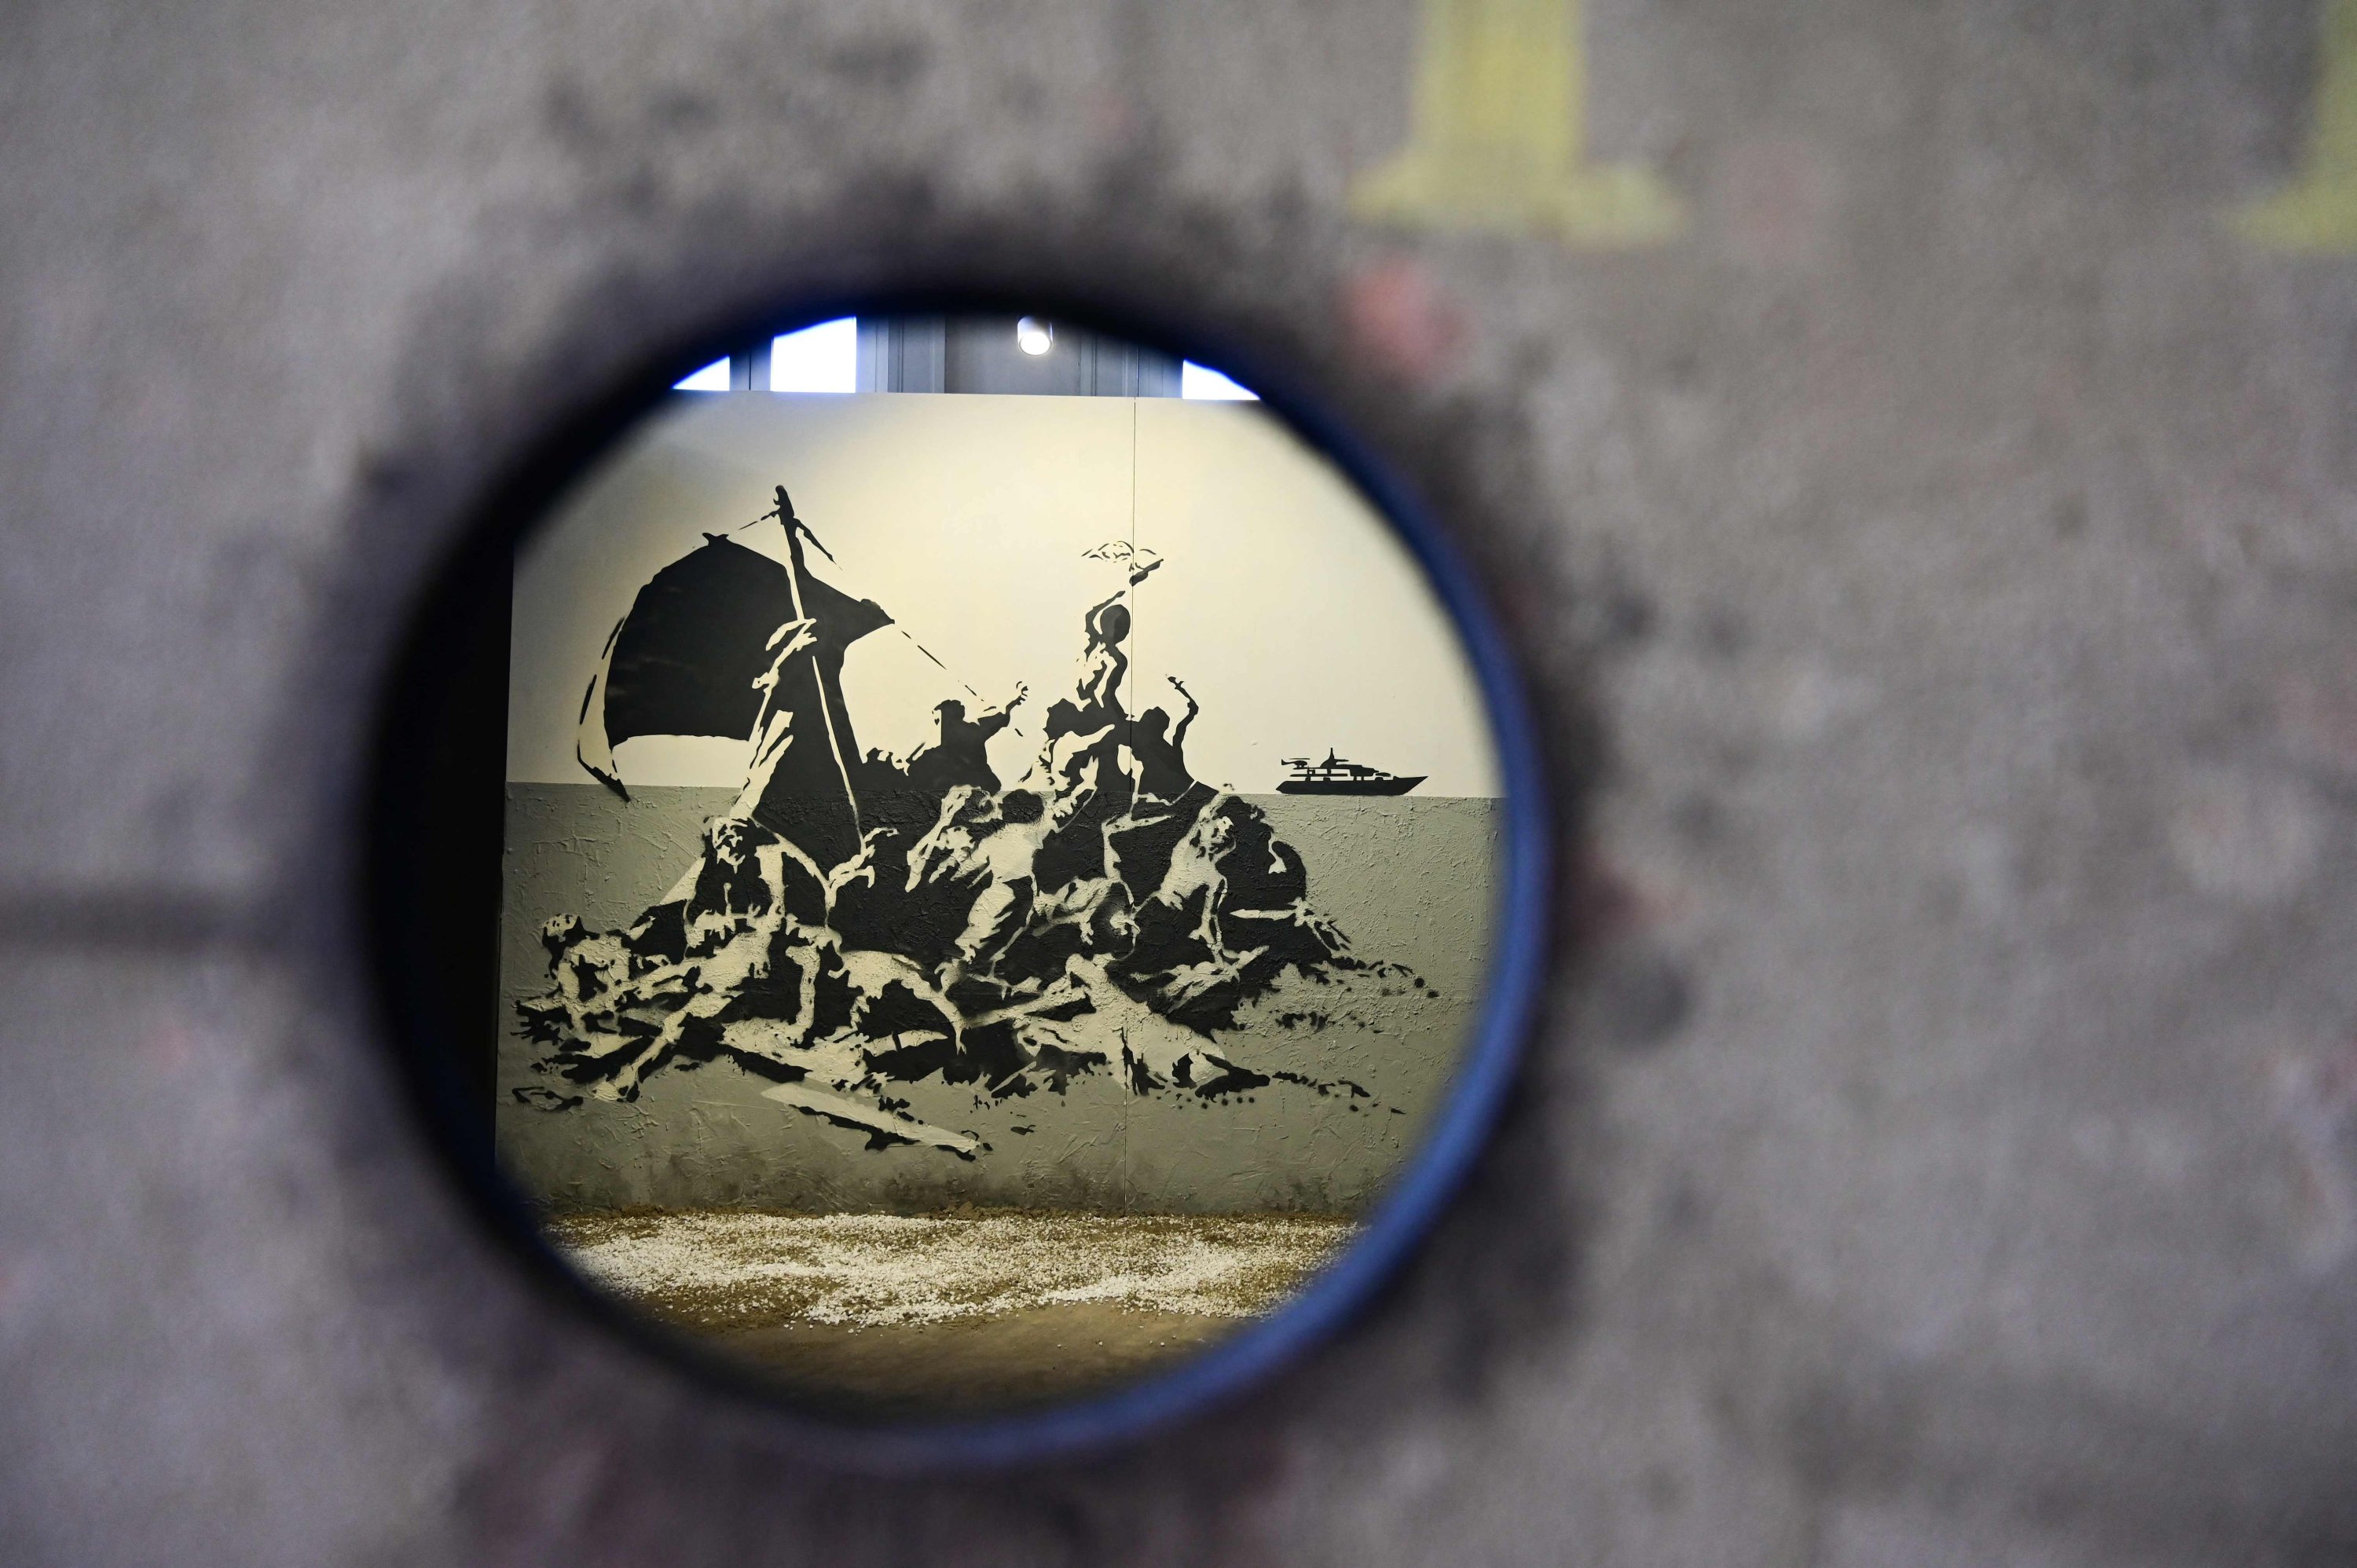 A picture taken through a hole shows British street artist Banksy's mural "Raft of the Medusa" during a preview of the exhibition “The Word of Banksy – The Immersive Experience" at the Milano Centrale main railway station in Milan, Italy on Dec. 2, 2021. (AFP)